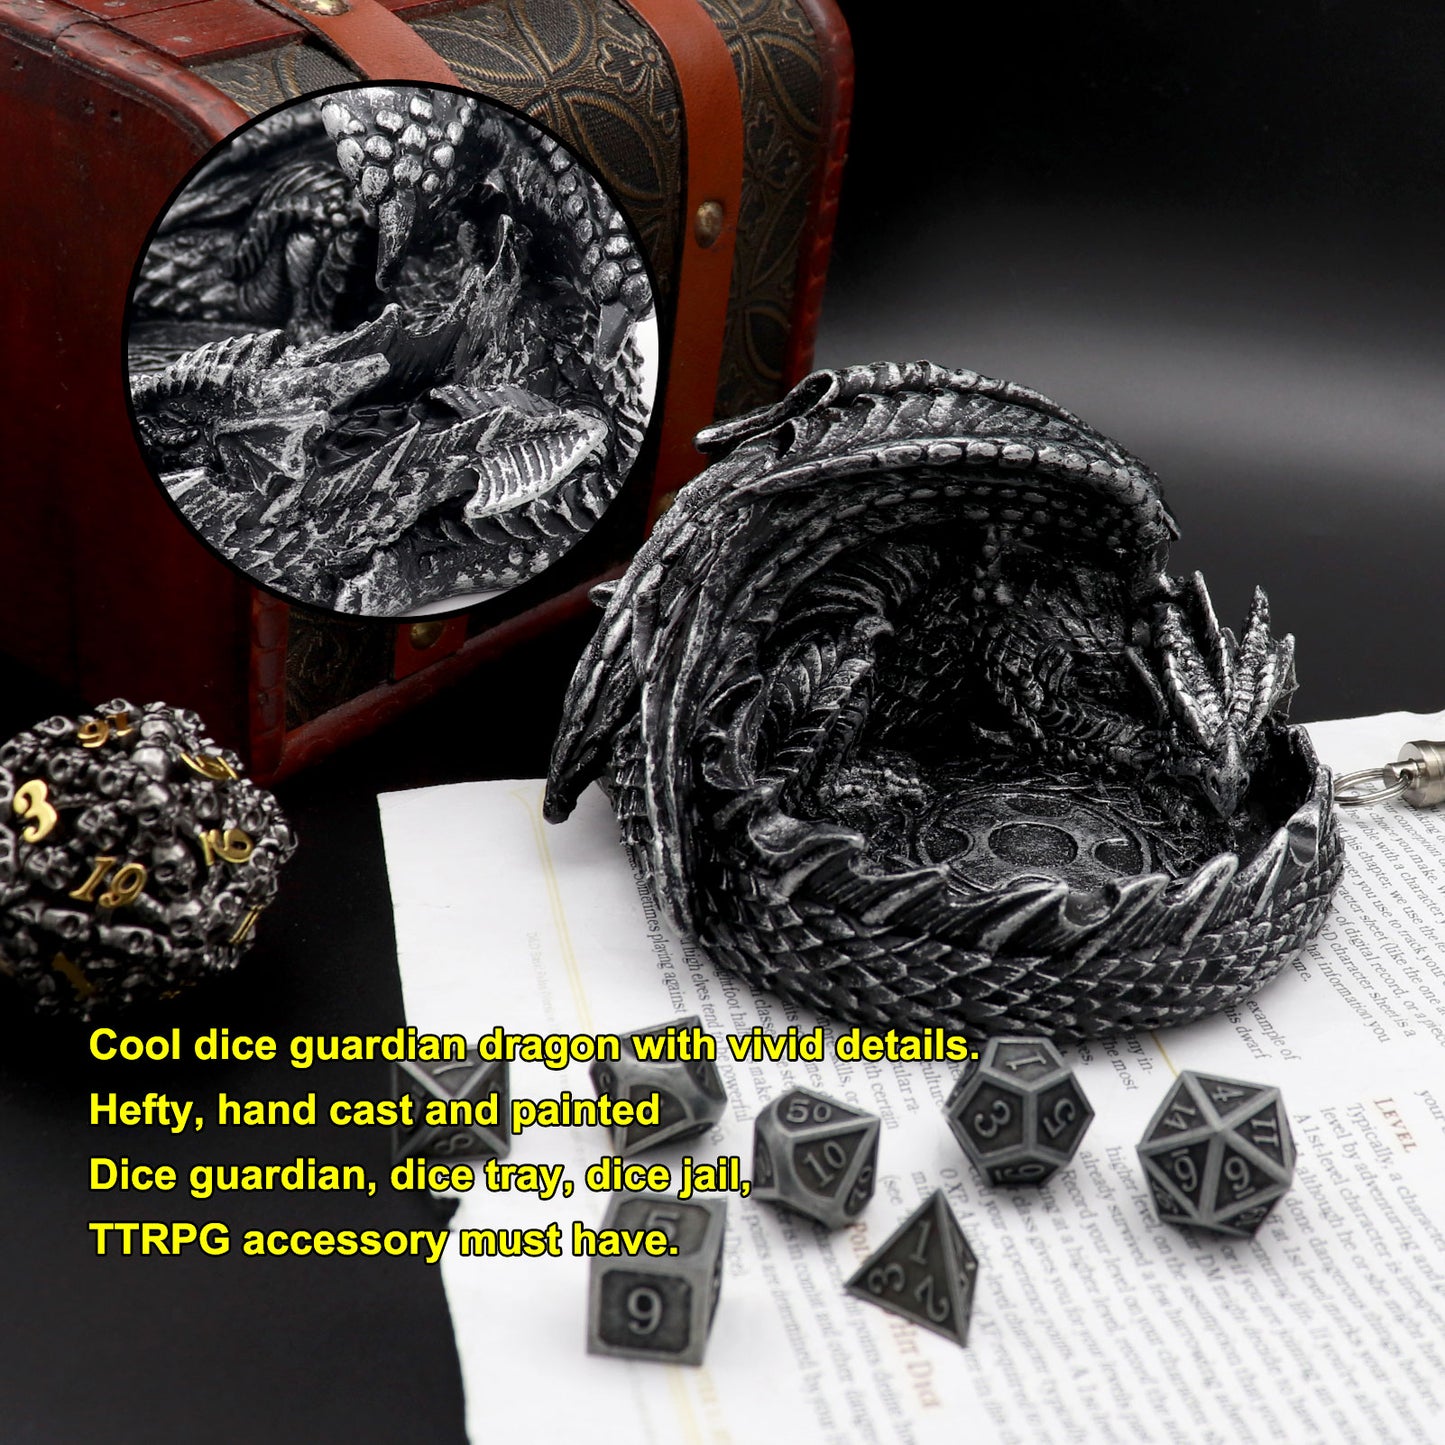 Haxtec Dragon Dice Jail Guardian DND Dice Tray Holder Dungeons and Dragons Accessories Novelty DM RPG Gift Dragon Statue Decor(Antique Silver)